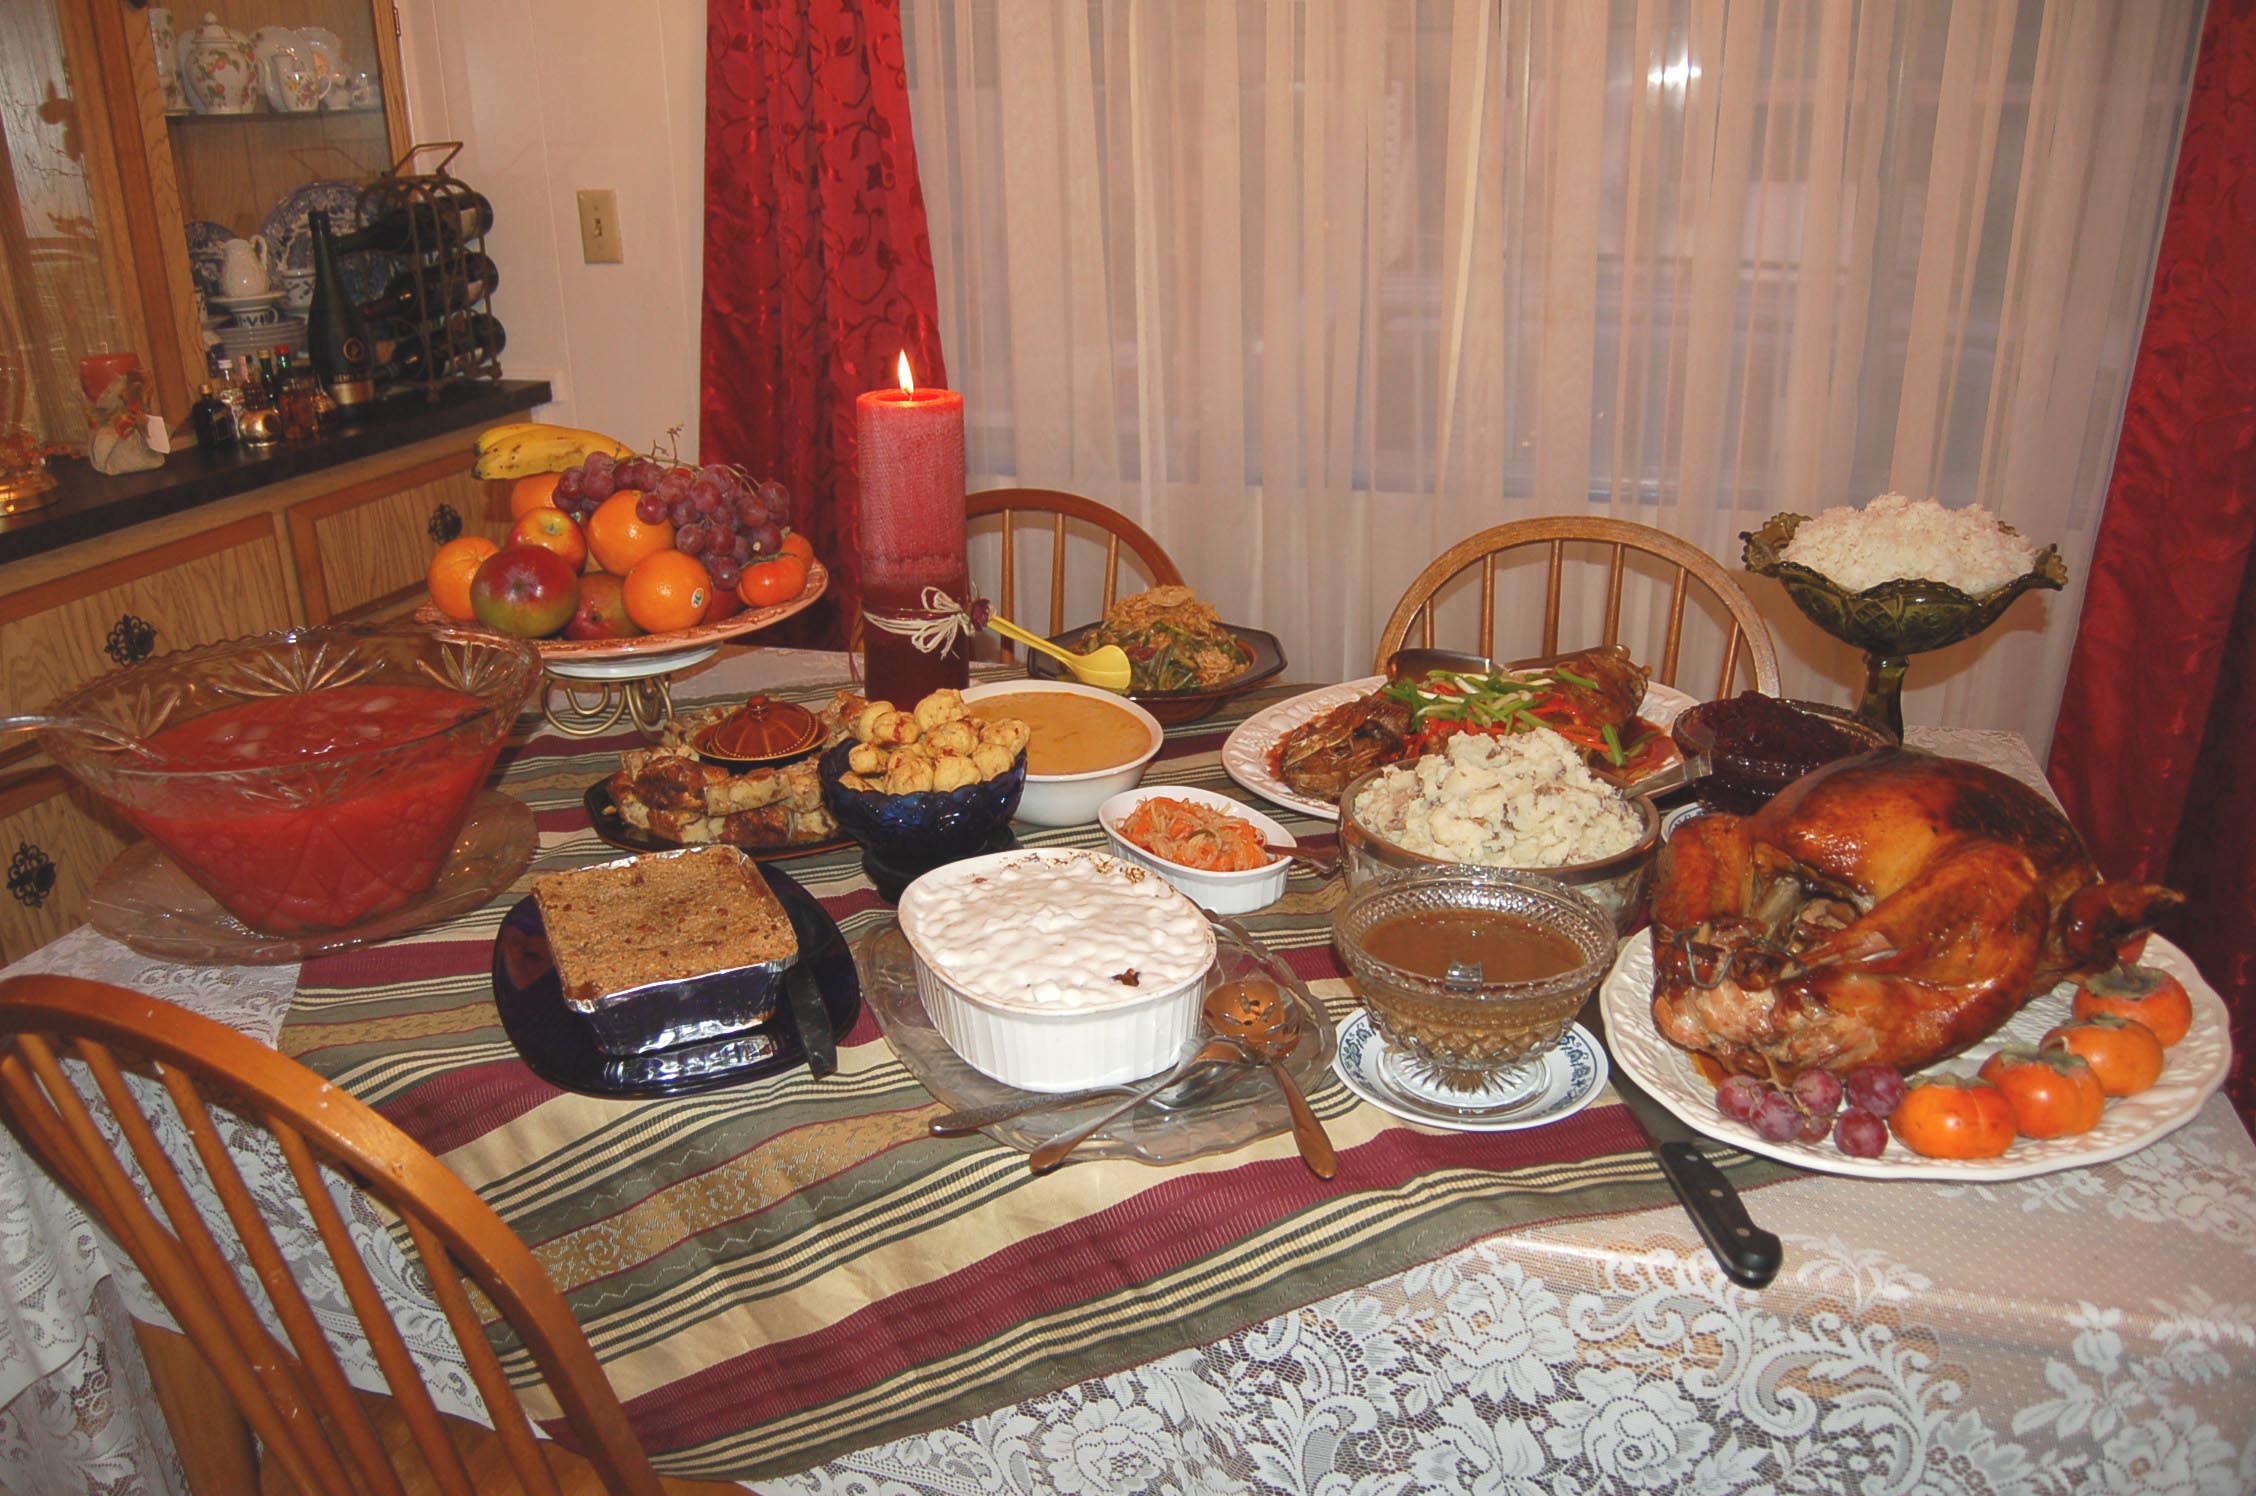 dinner is served on table with turkey and other food